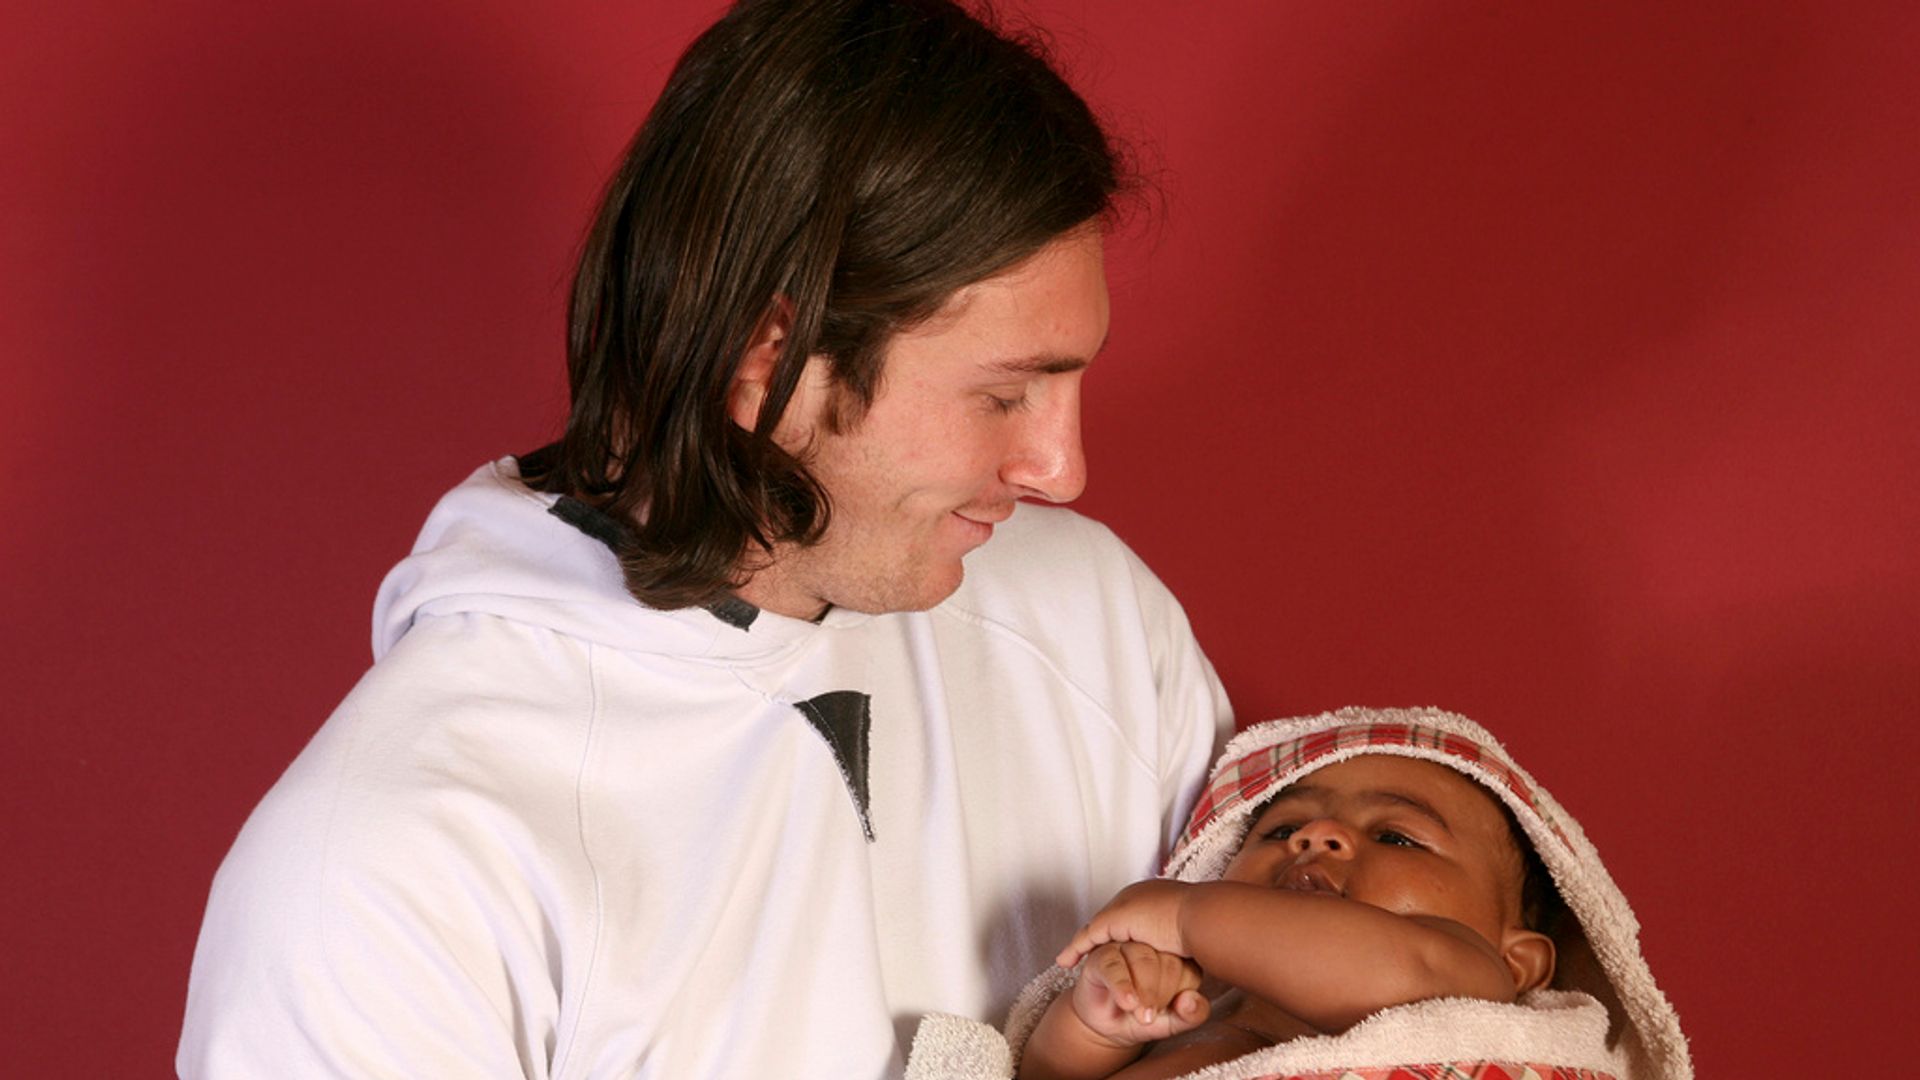 Photos of Messi with baby Lamine Yamal resurface